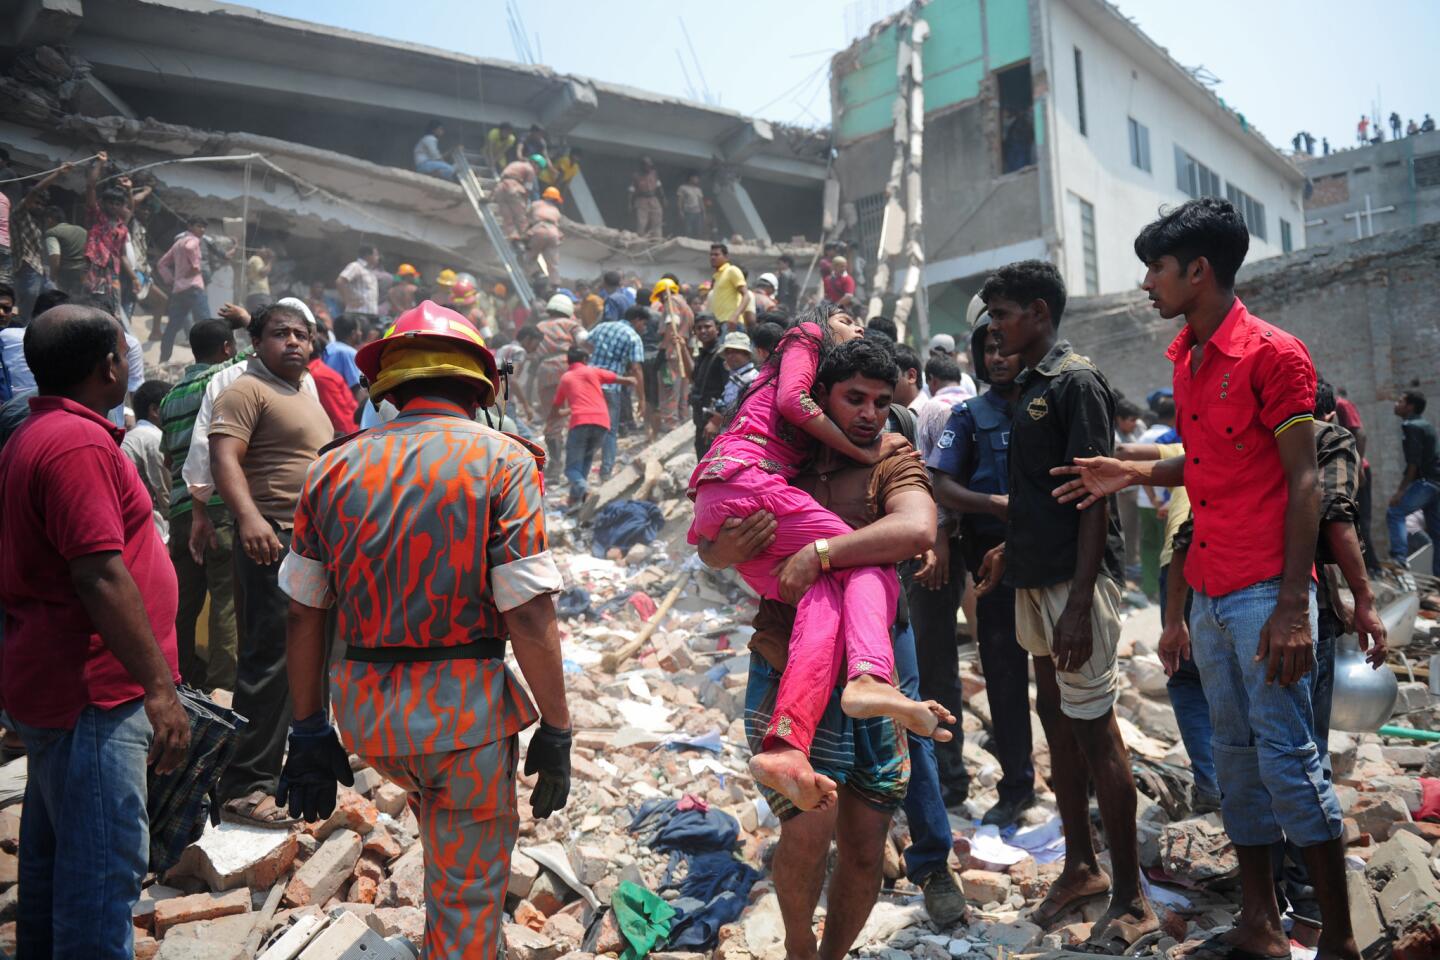 2013 garment factory collapse in Bangladesh